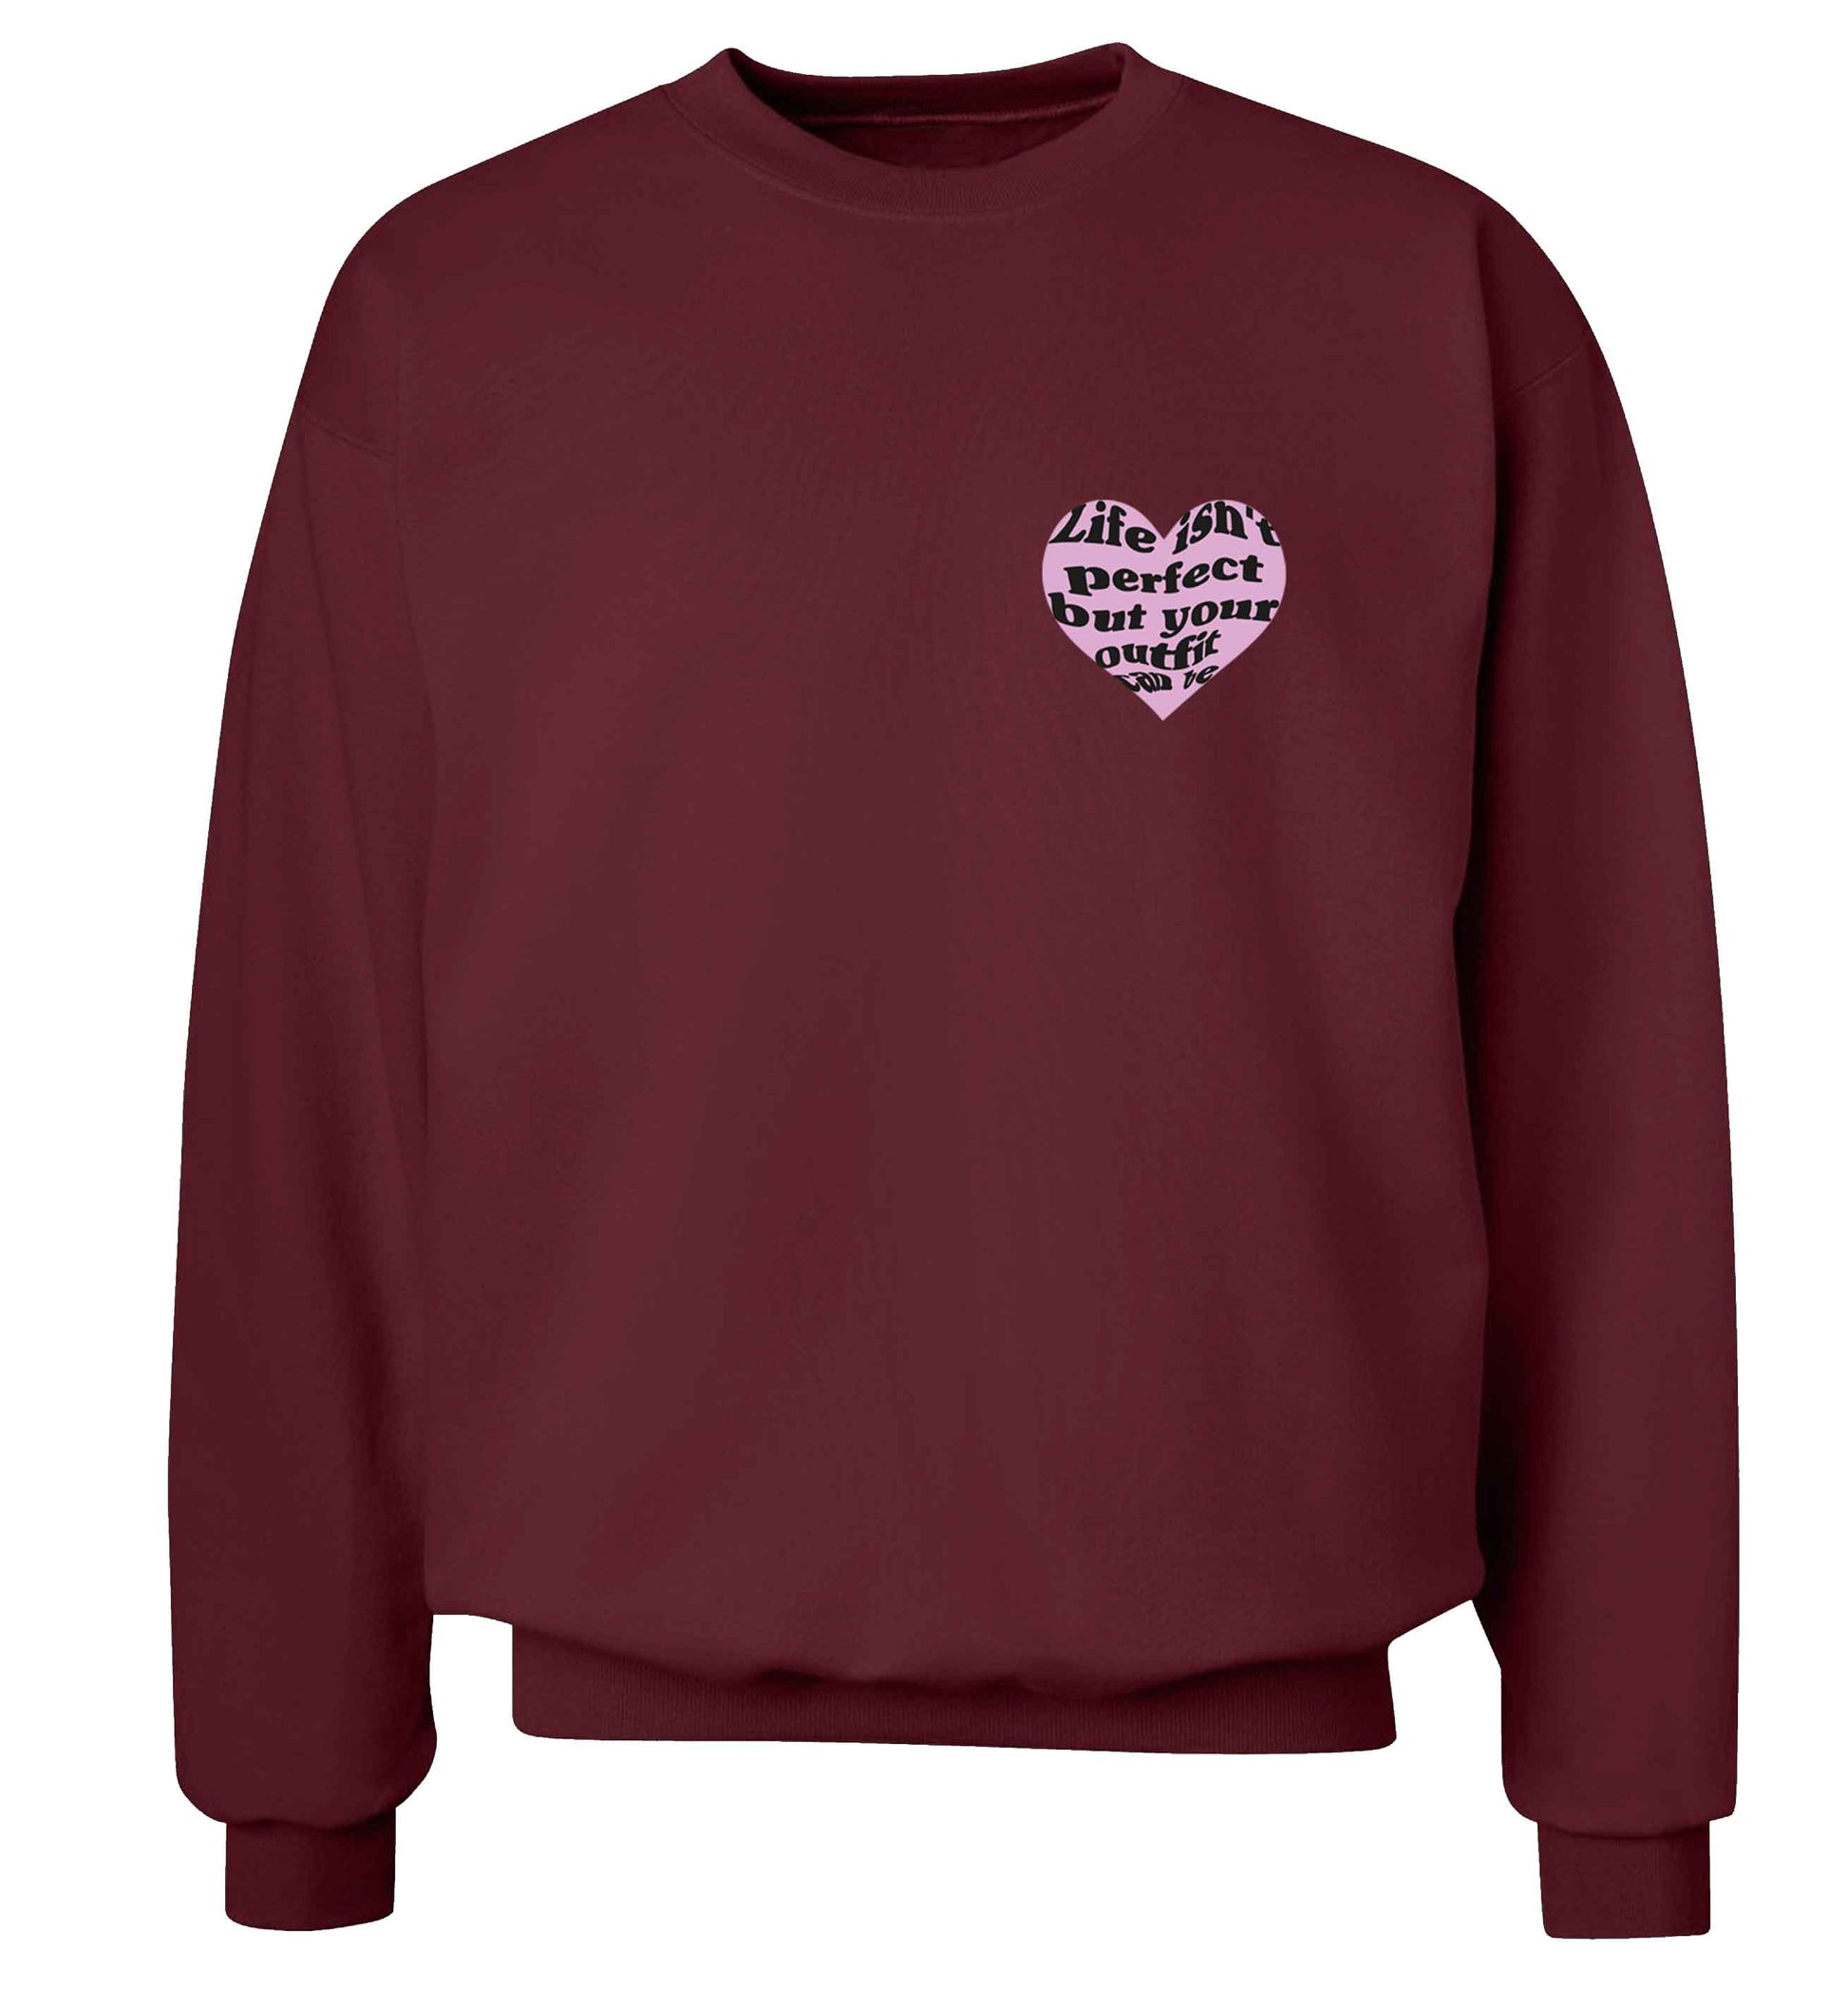 Life isn't perfect but your outfit can be adult's unisex maroon sweater 2XL